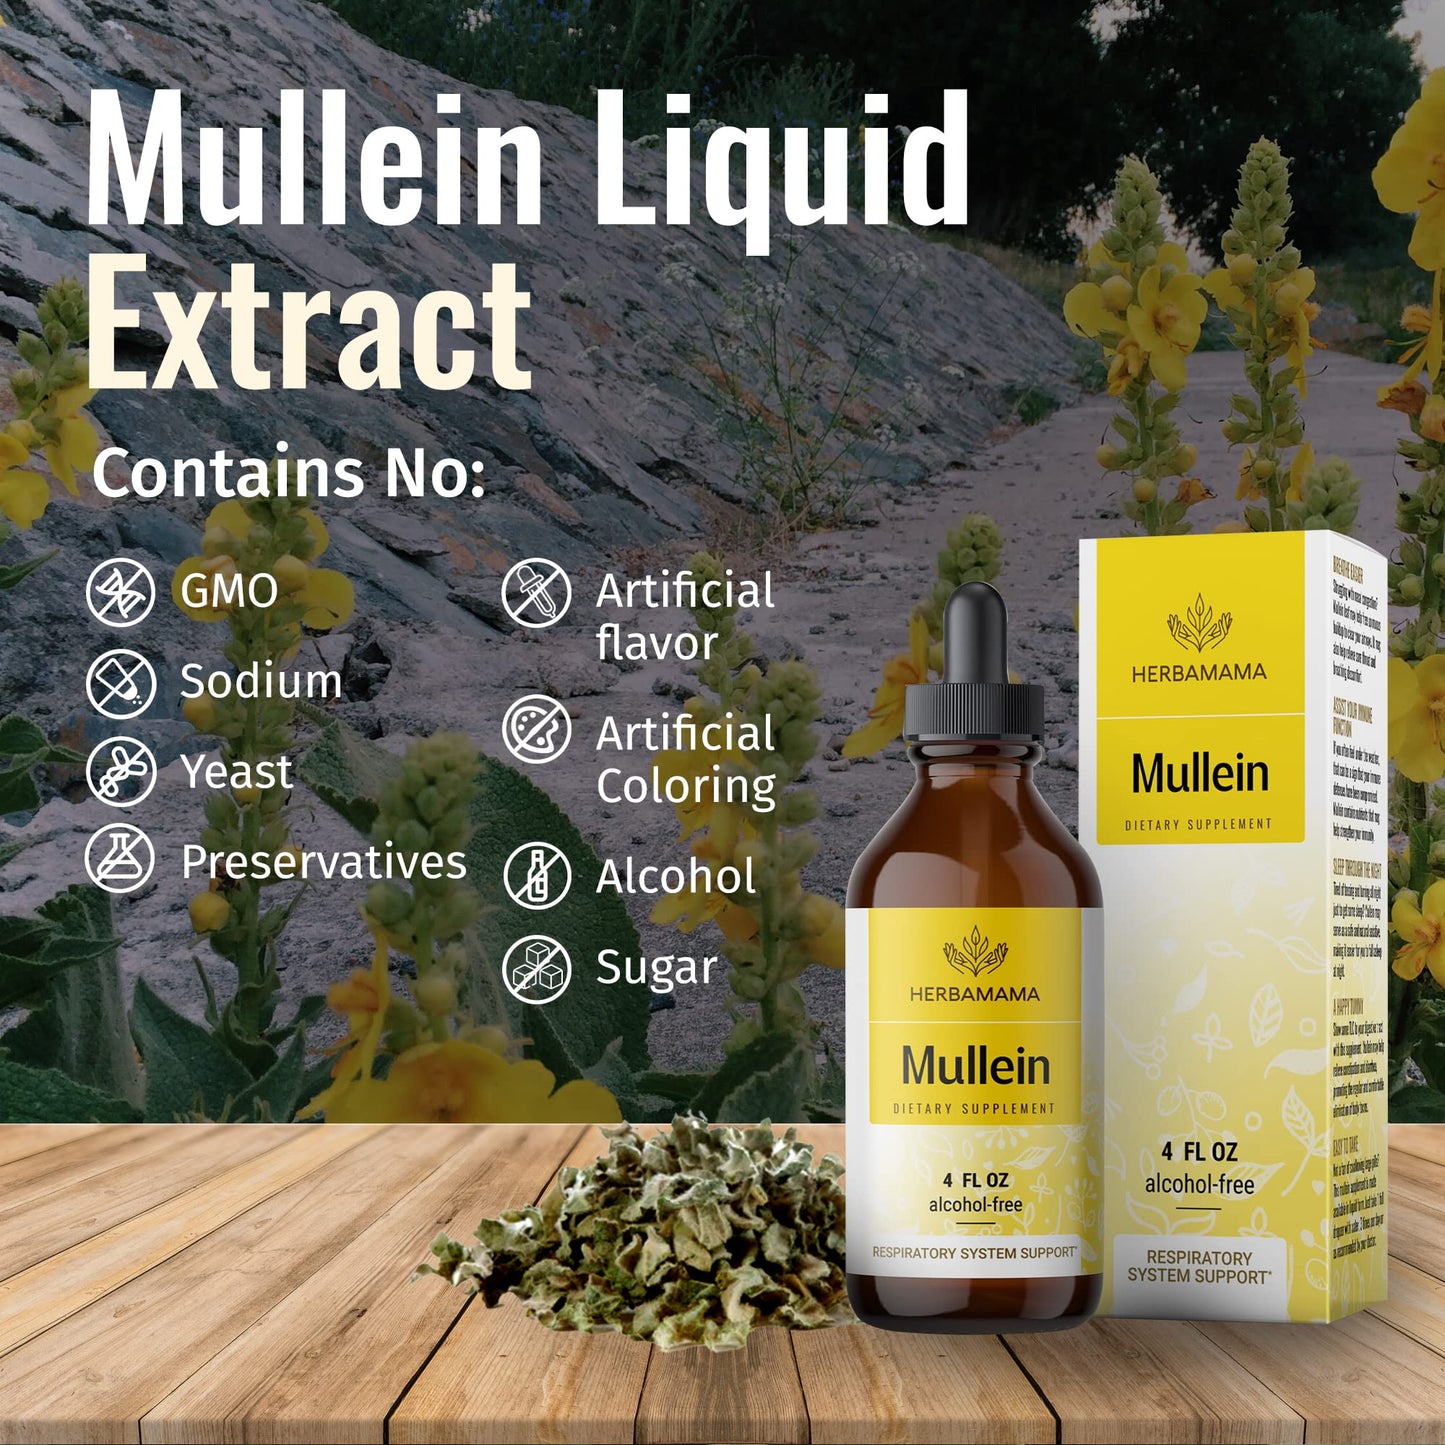 Mullein Leaf Tincture - Lung Cleanse - Vegan Mullein Drops - Lung Detox - Respiratory Health and Immune Support Drops - Natural Supplement Liquid Extract 4 fl.oz.